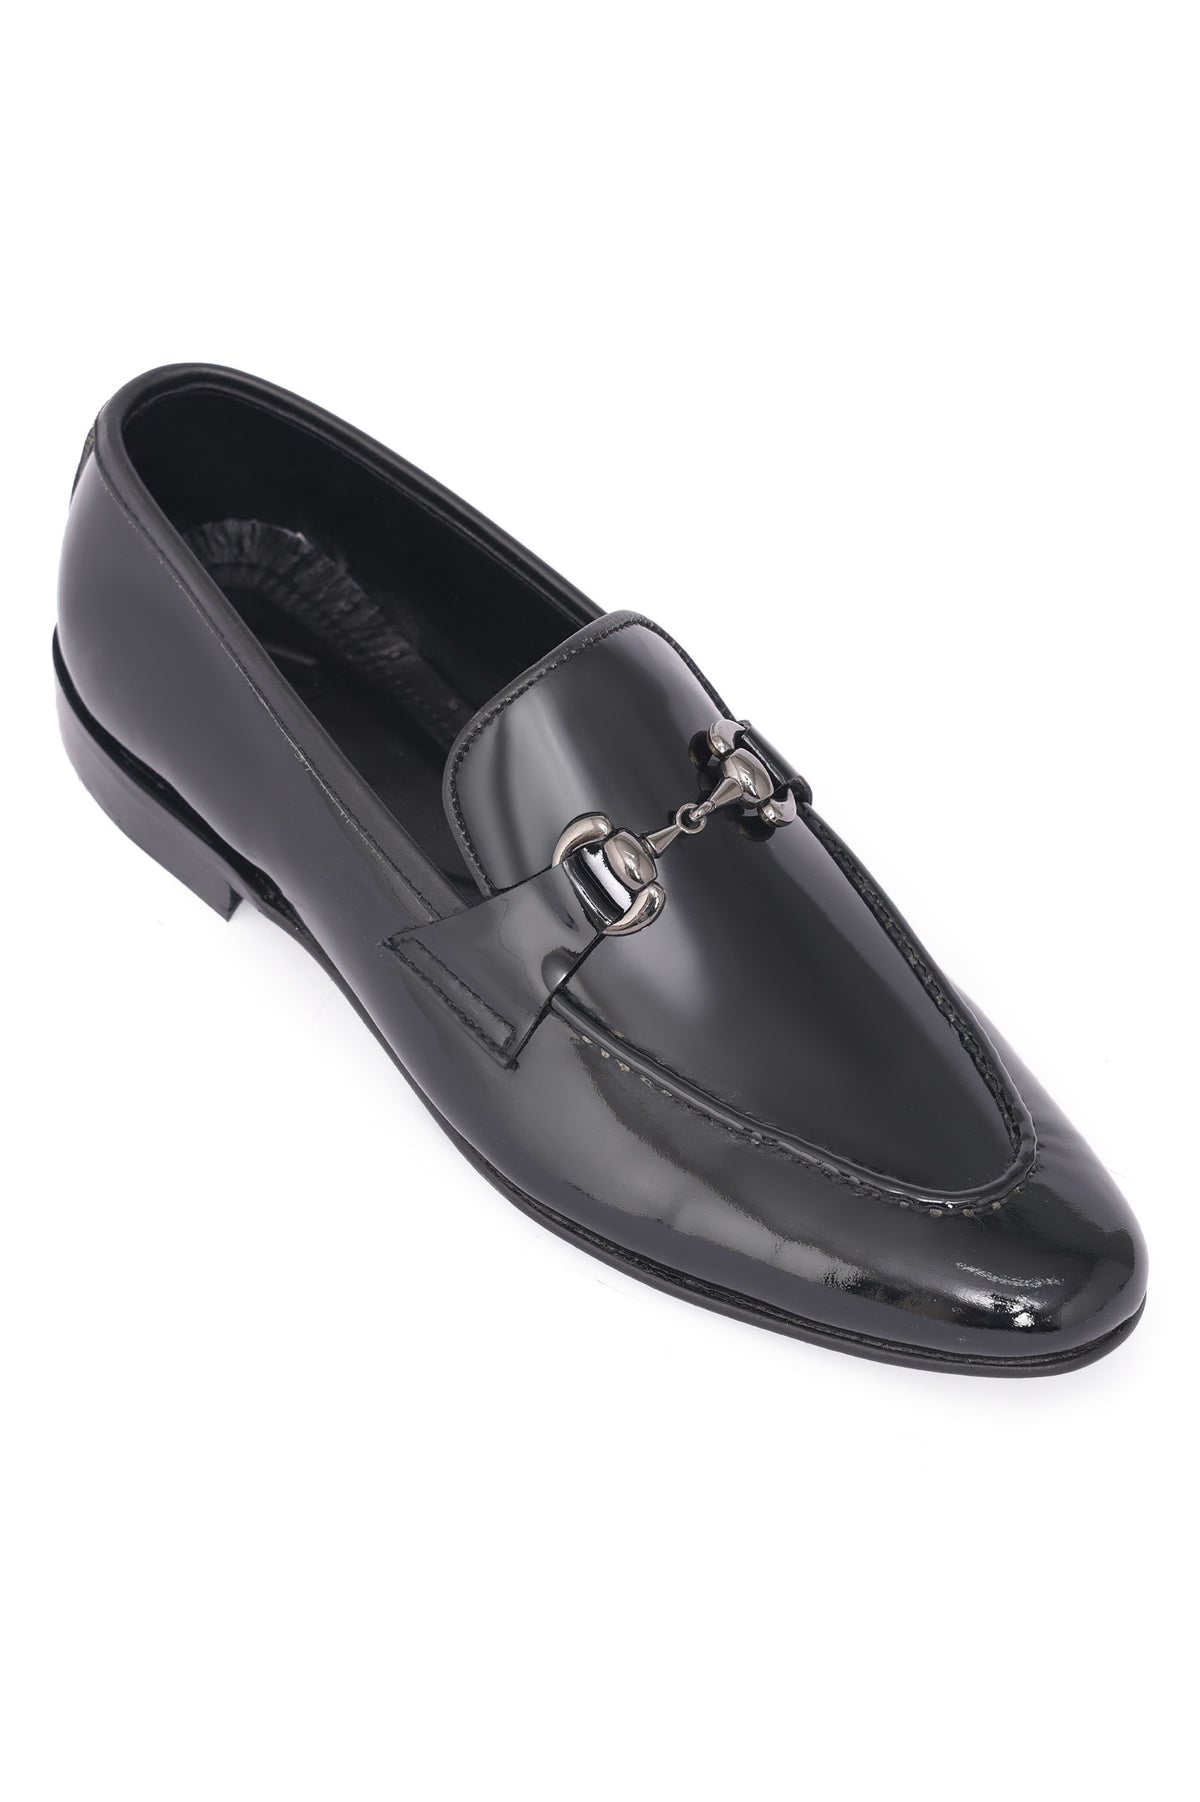 PATENT LEATHER LOAFERS-BLACK